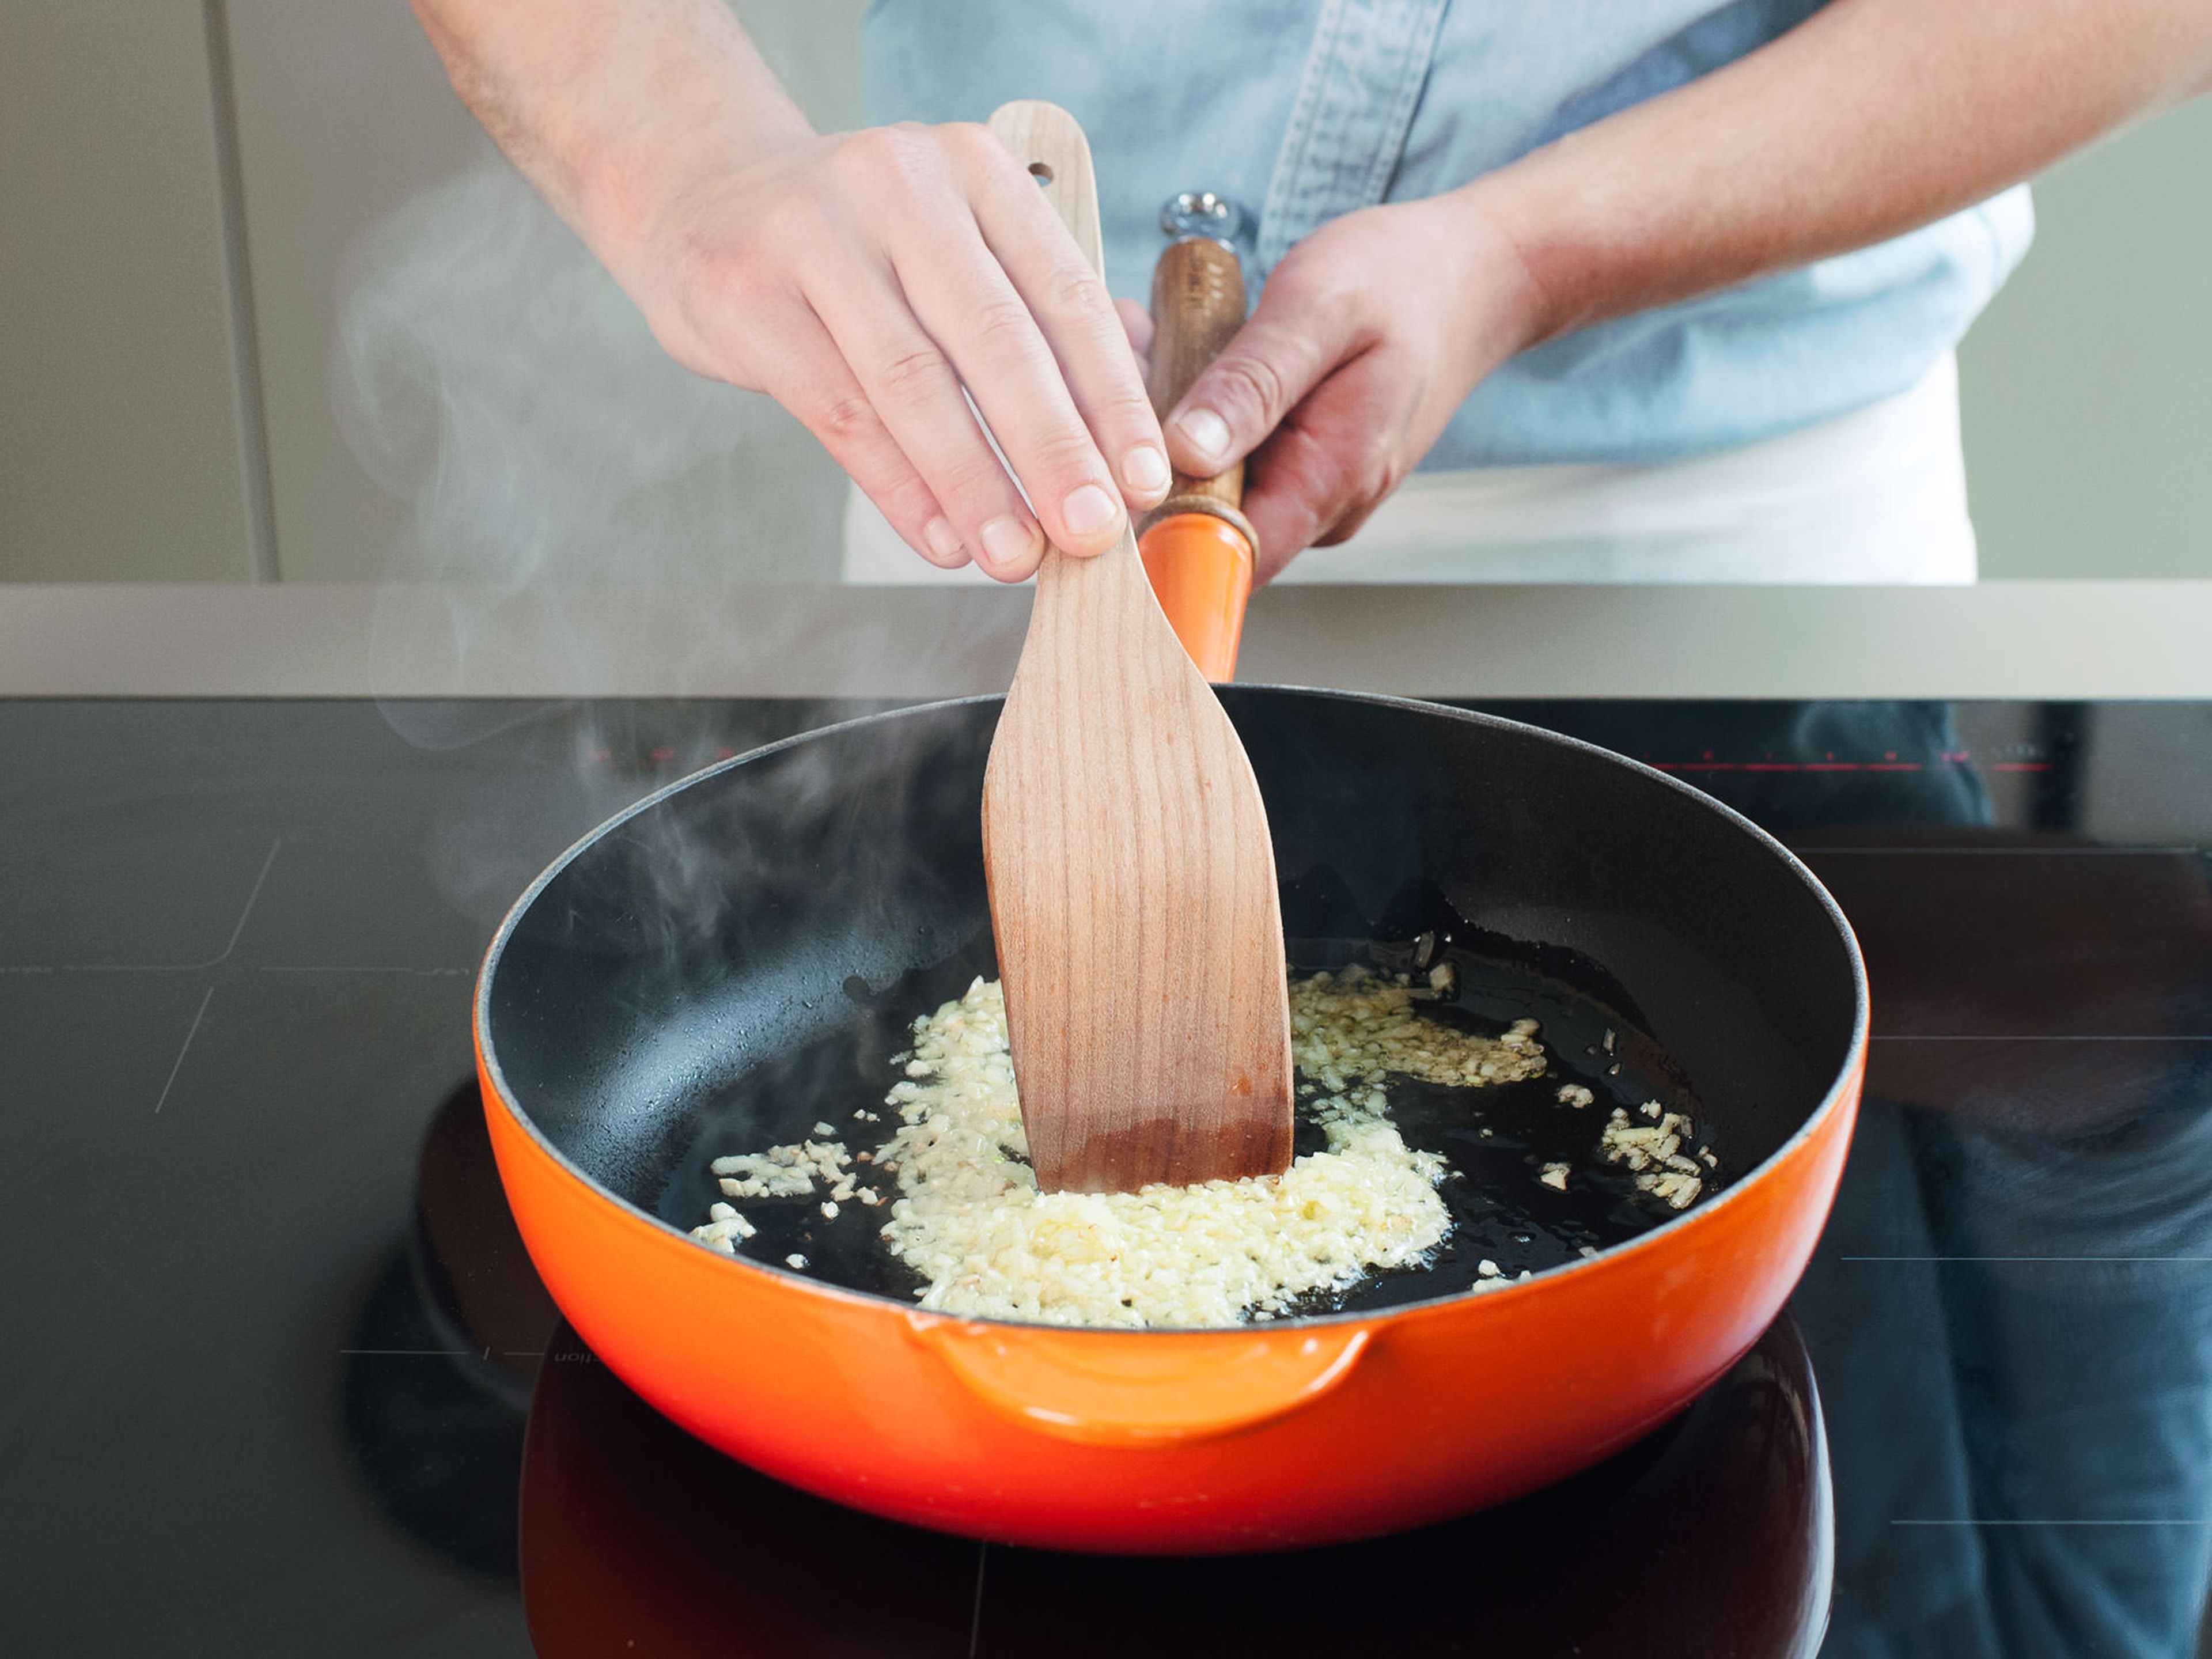 Heat up olive oil in a large frying pan over medium heat. Add chopped onion and garlic, and sauté for approx. 3 – 5 min. until onions are translucent and garlic begins to turn golden brown. Be careful not to burn the garlic!